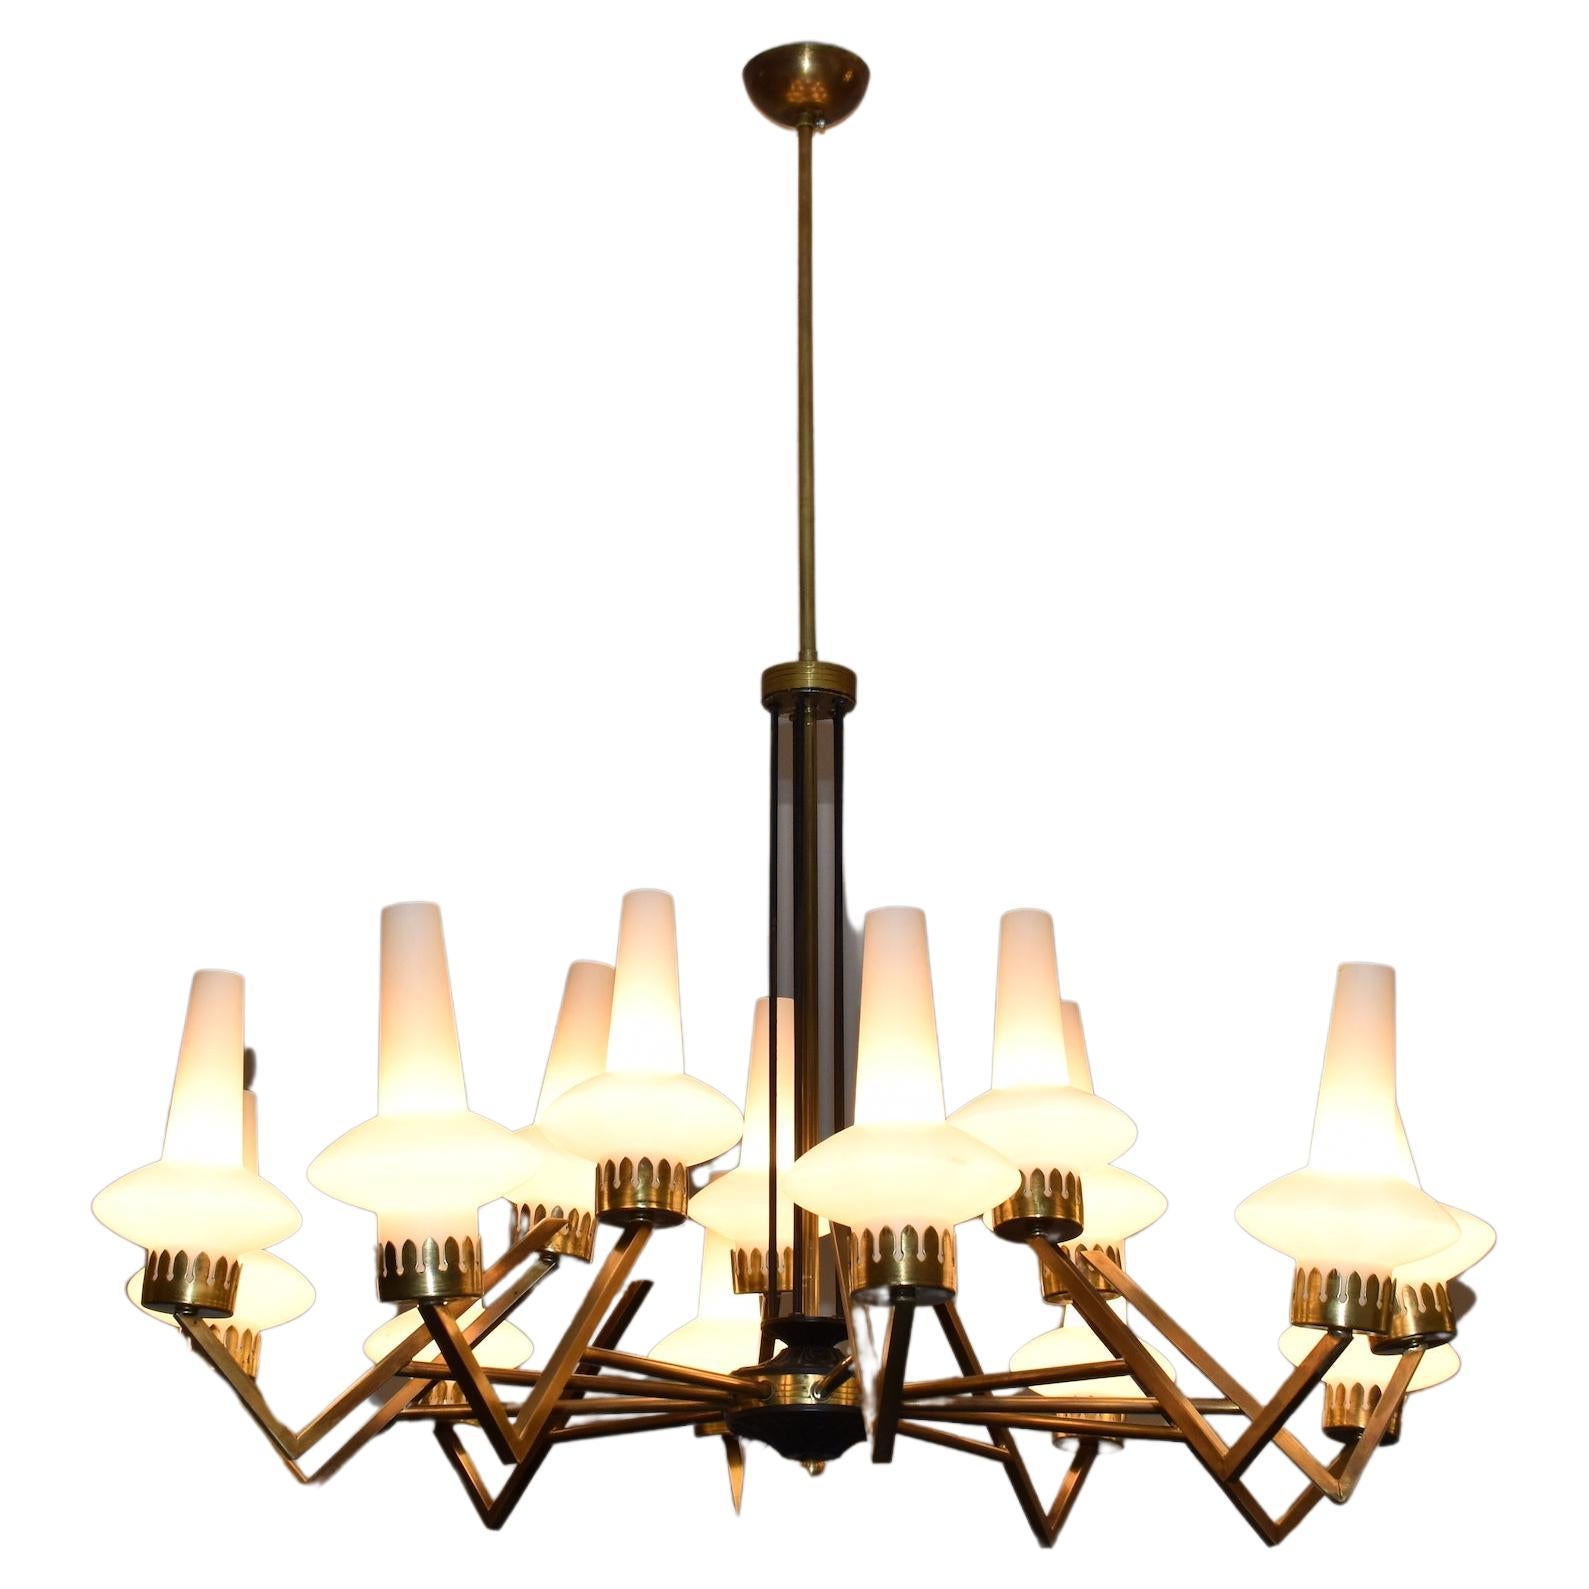 A spectacular Italian 15-arm chandelier from the 1950s attributed to Stilnovo designed with angular arms and original frosted glass shades. This collectable piece is highlighted by its black lacquered and sculpted details on the main structure. Each